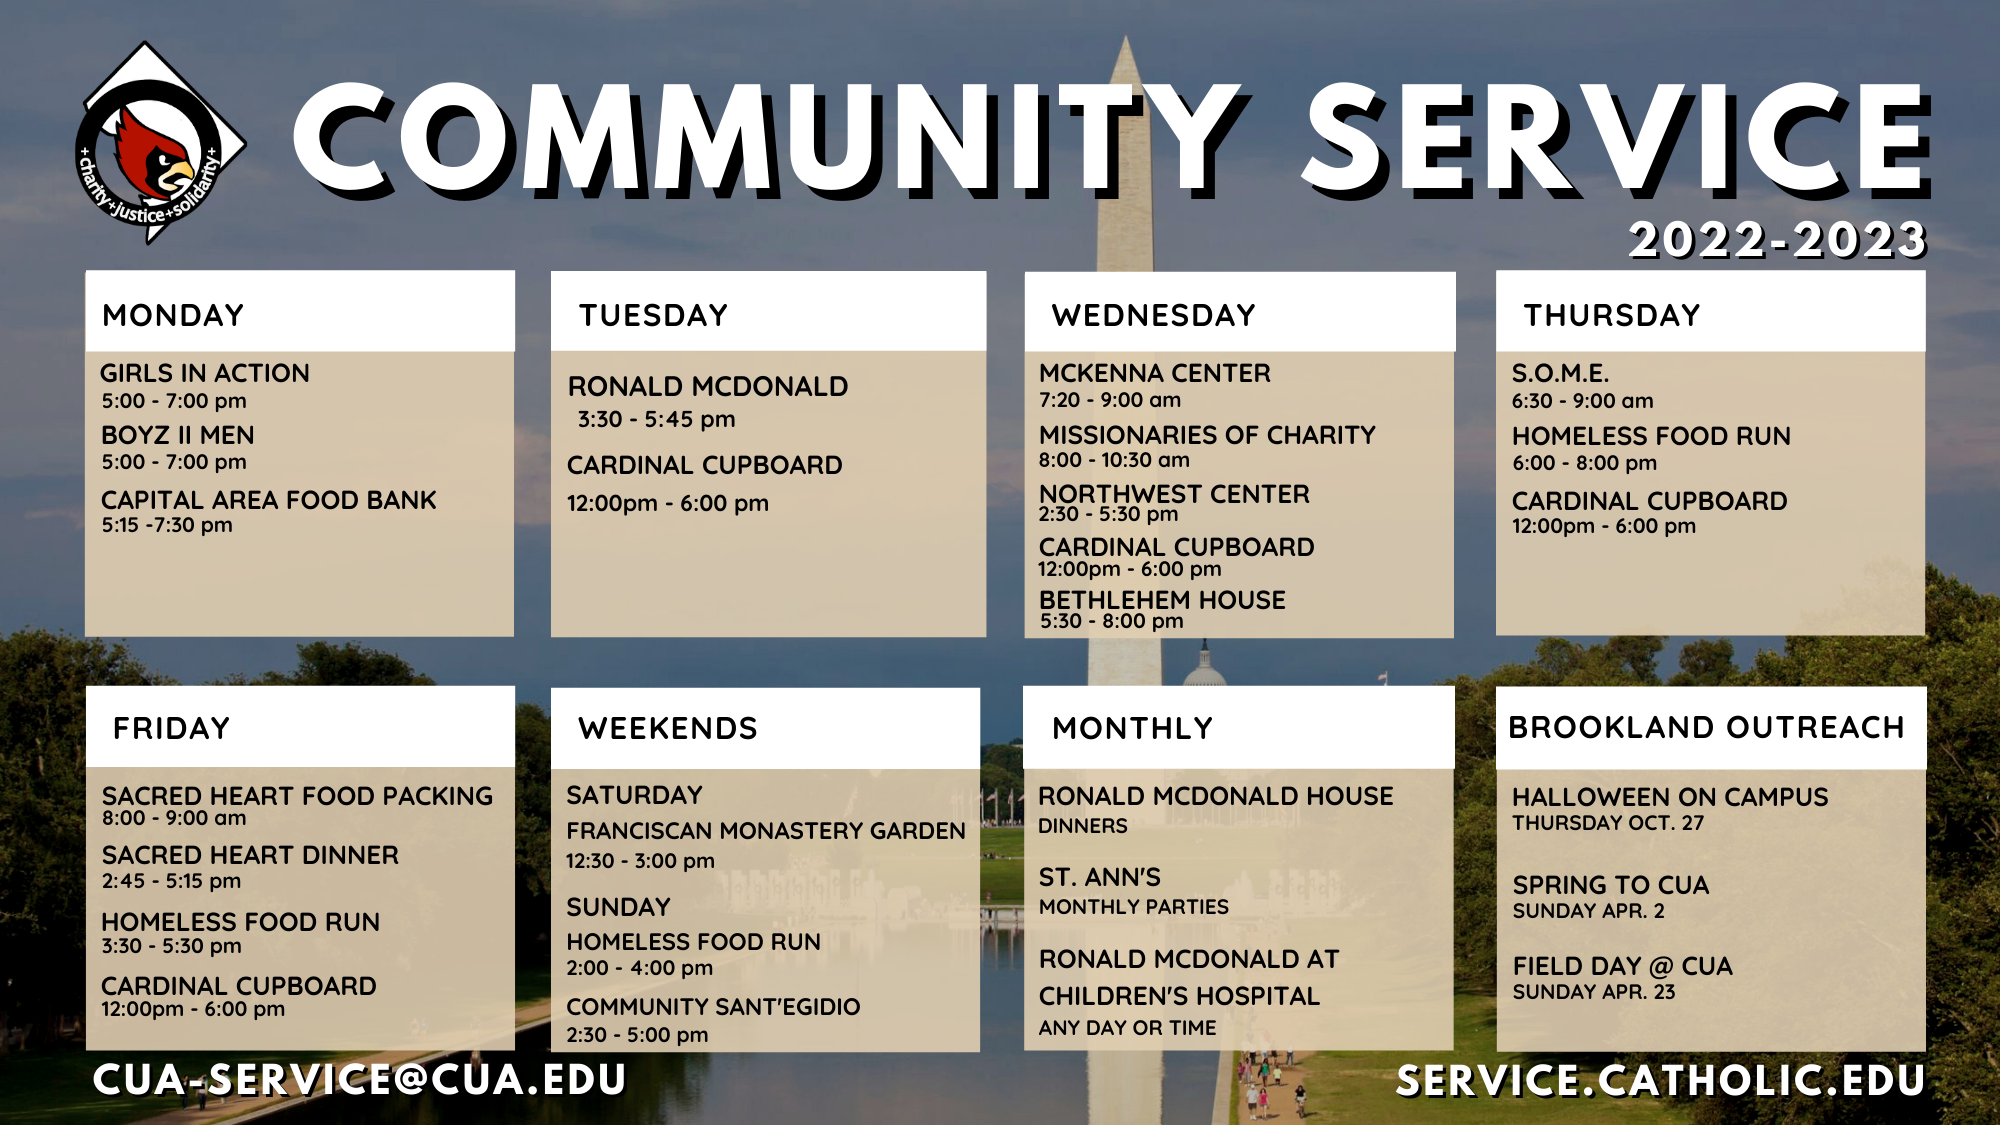 copy-of-community-service-card-2022-23-1.png